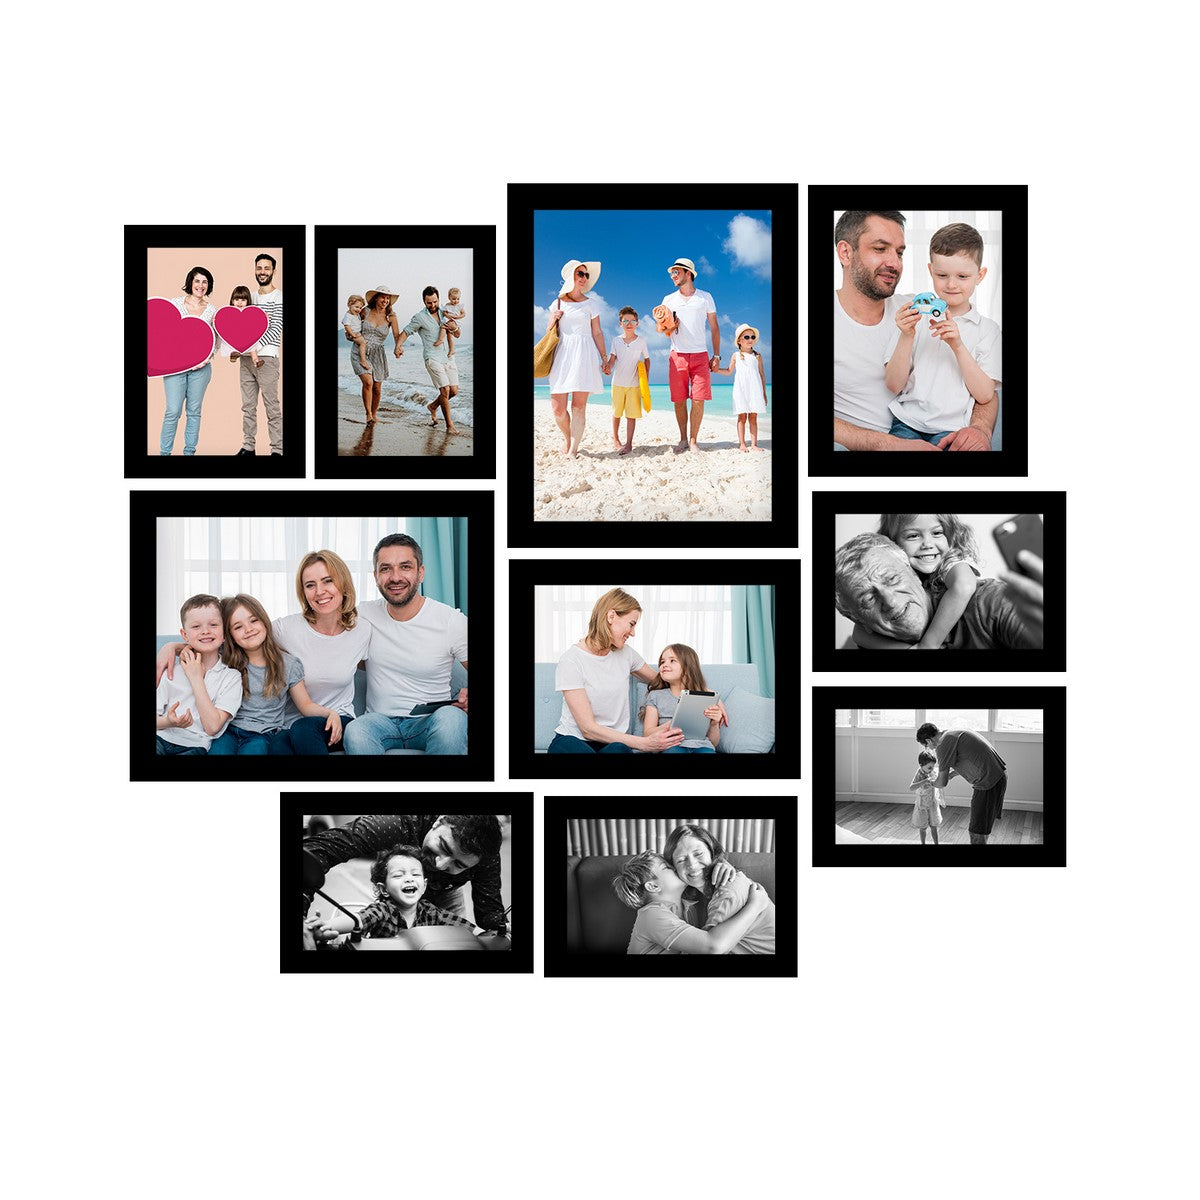 Memory Wall Collage Photo Frame - Set of 10 Photo Frames for 6 Photos of 5"x7", 2 Photos of 6"x8" and 2 Photos of 8"x10"